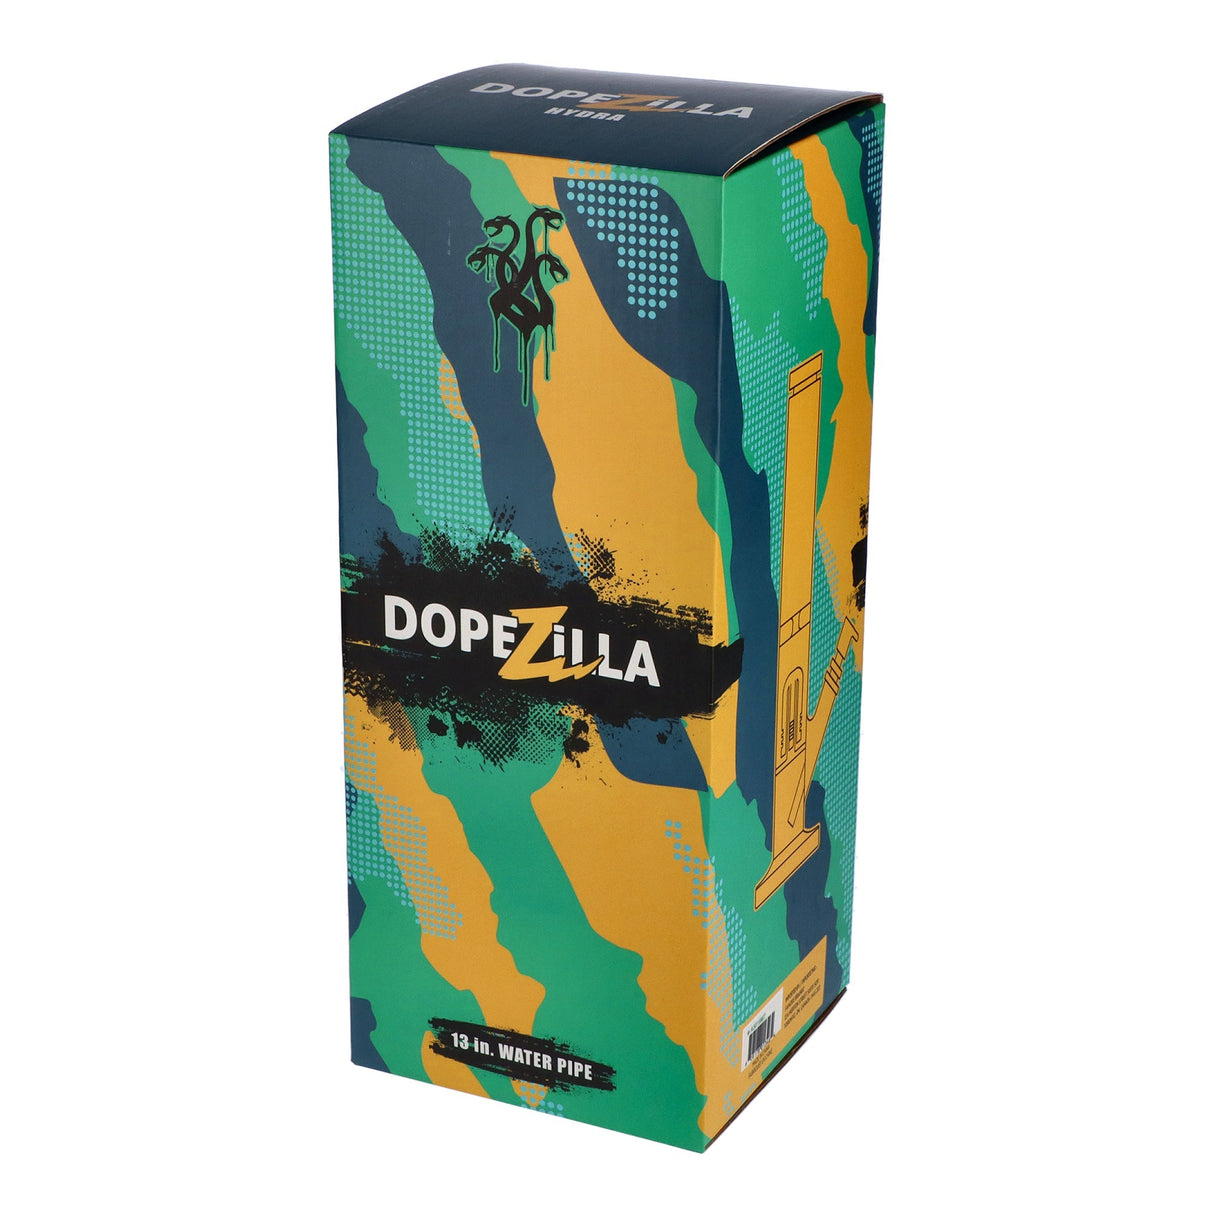 Dopezilla Hydra straight water pipe packaging, 13" and 16" options, vibrant colors